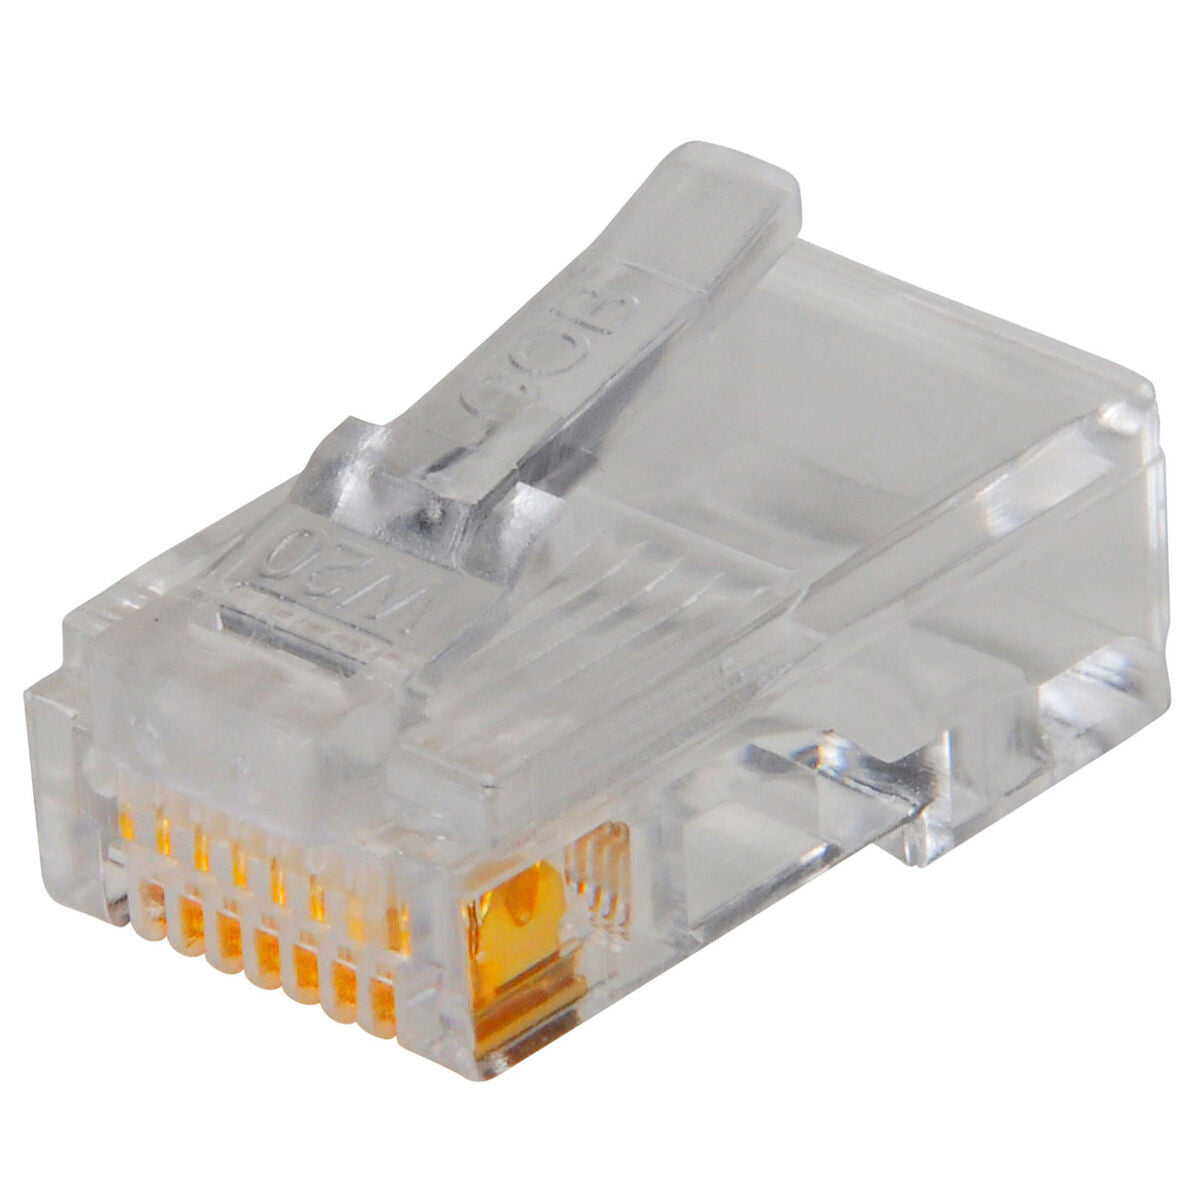 RJ45 8C Modular Connectors For Flat Cable (10 pack)